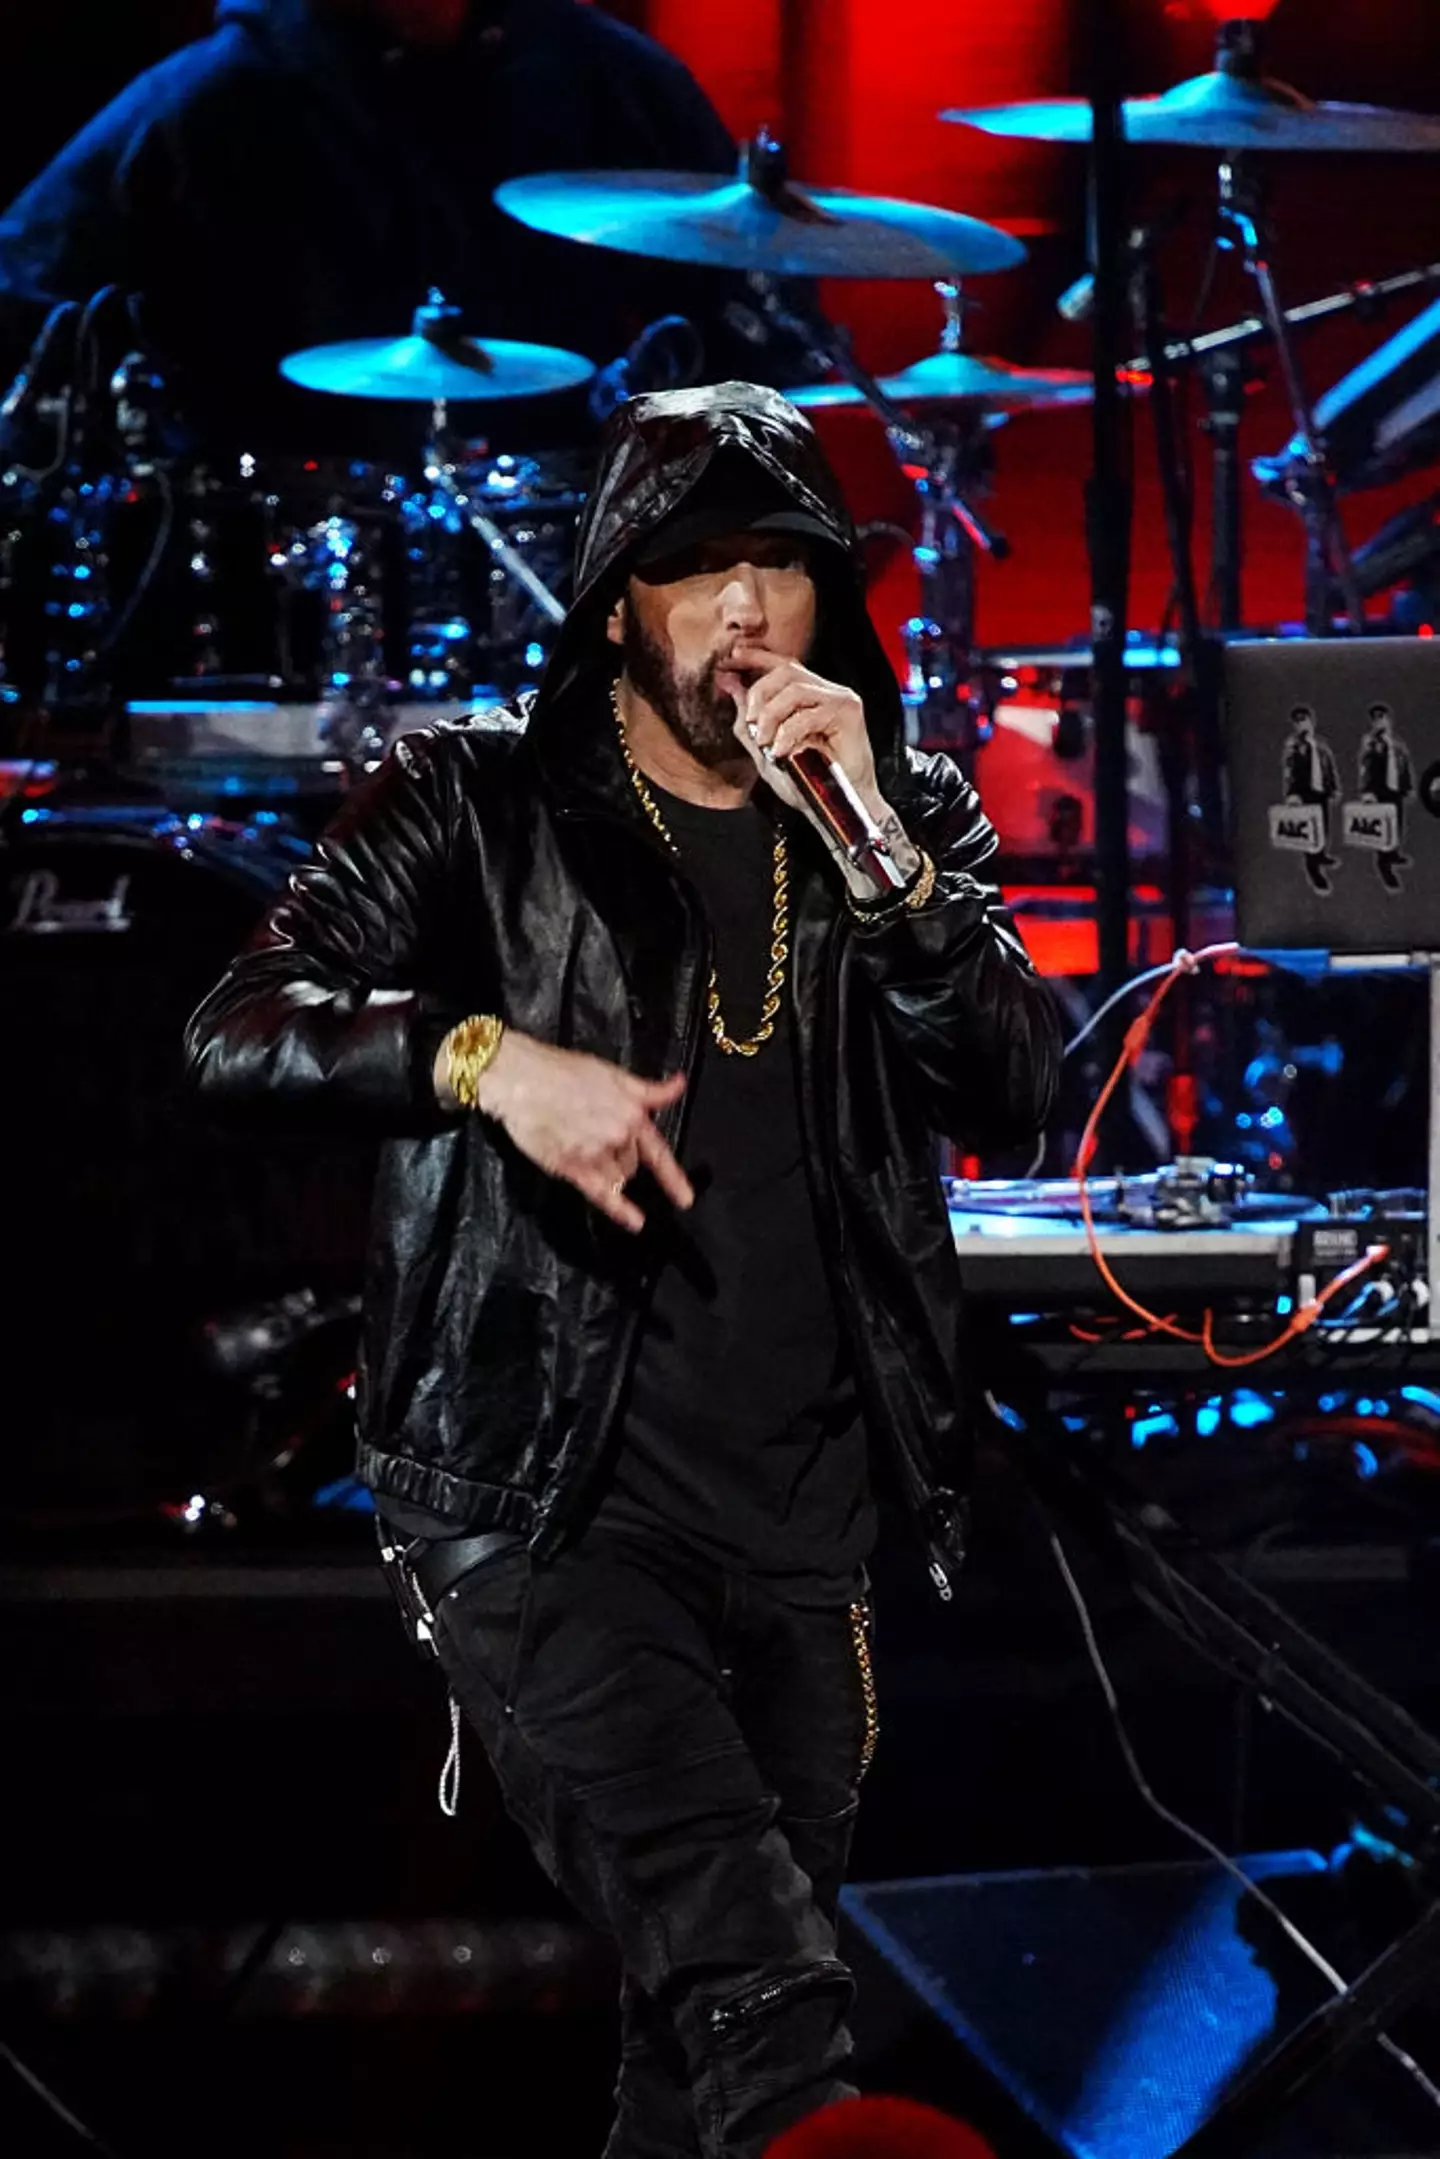 Eminem has been open about his struggles with substance addiction. (Jeff Kravitz/FilmMagic)